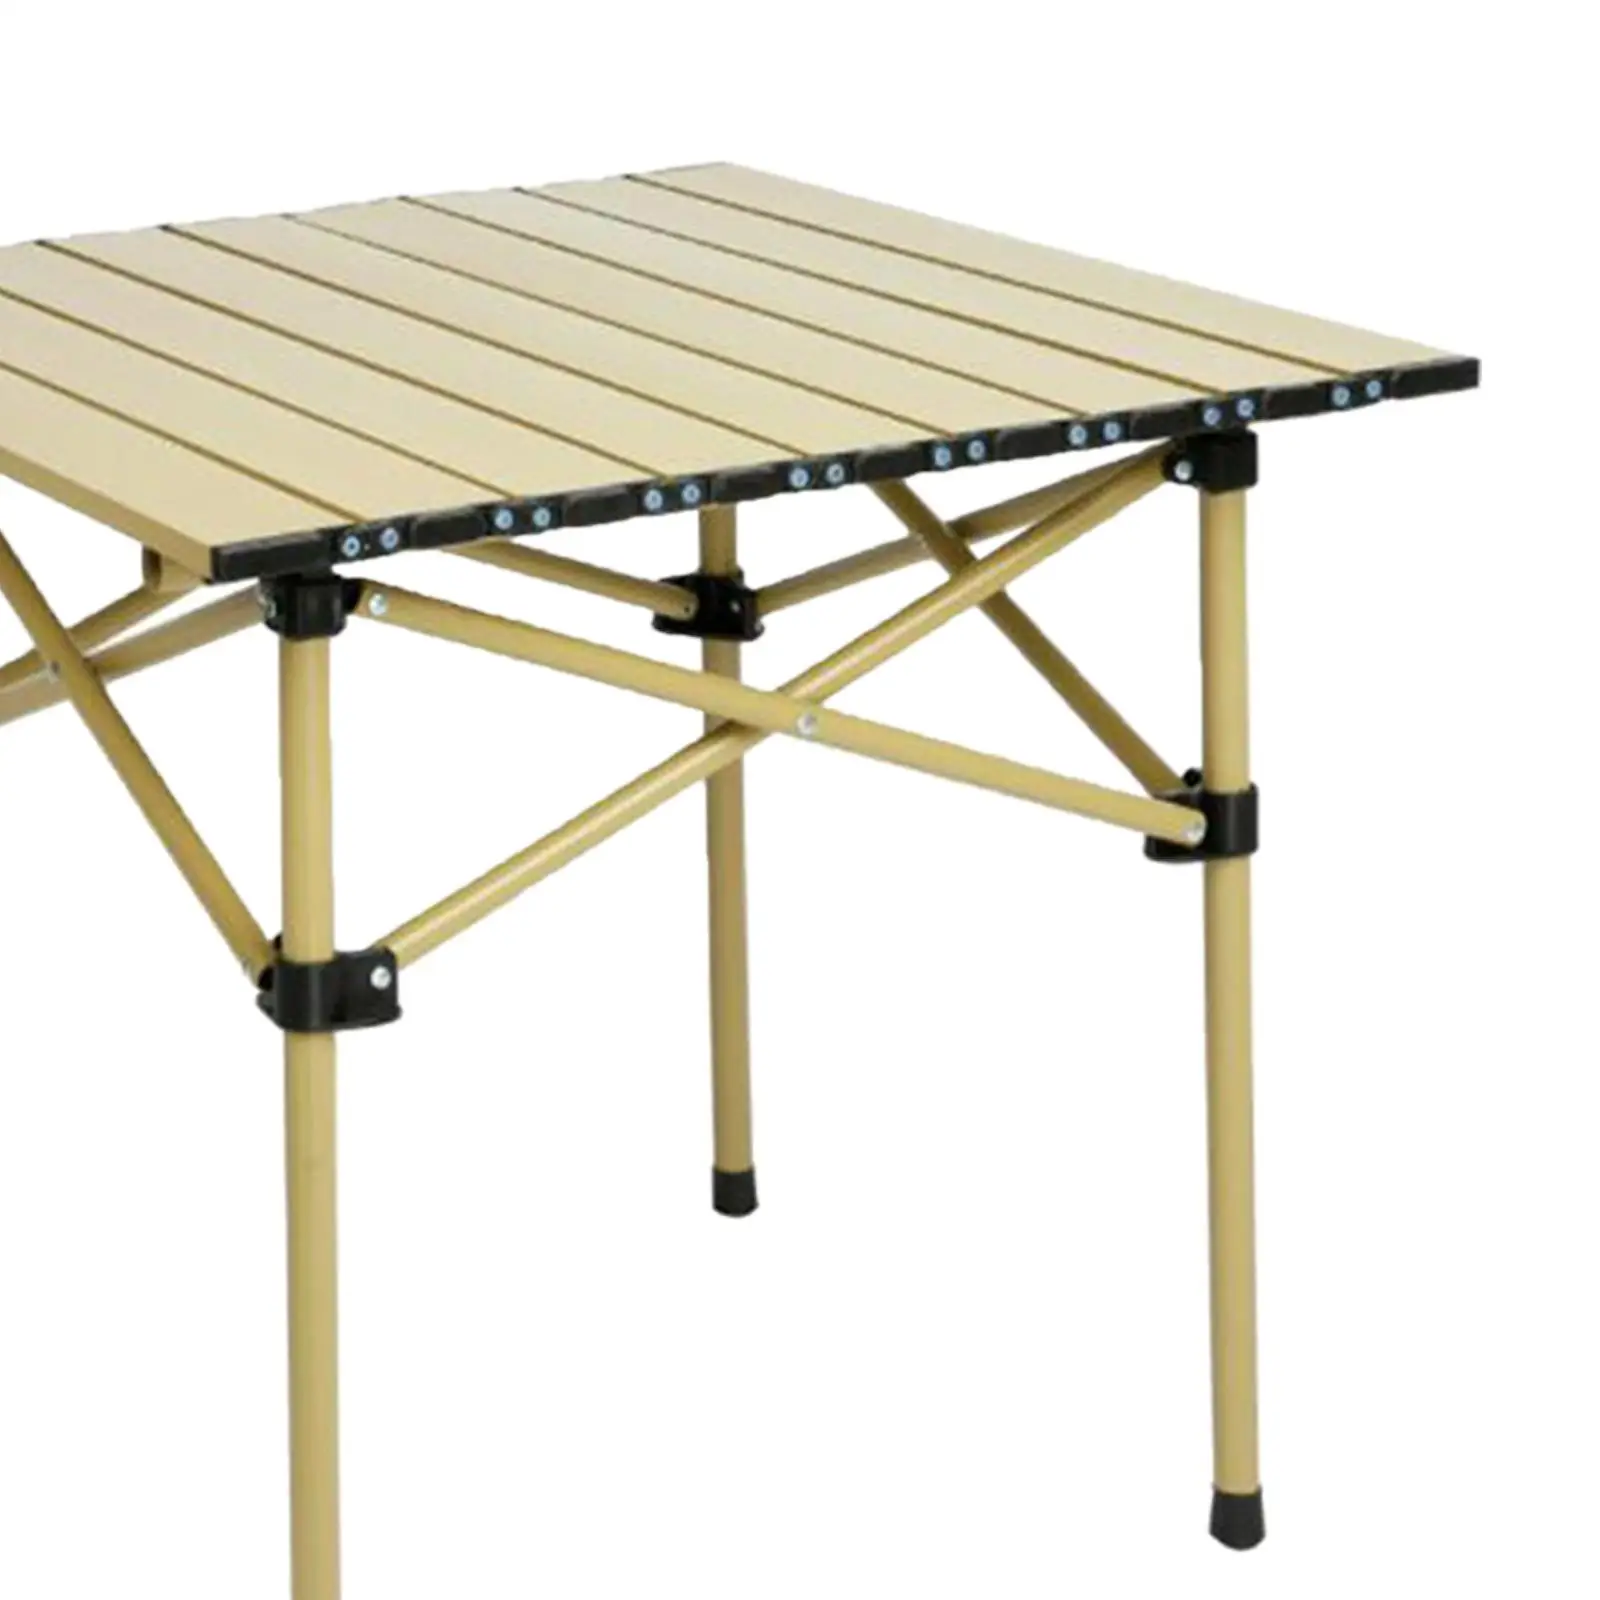 Camping Folding Table Chair Set Steel Camping Table with 2 Stools, Patio Folding